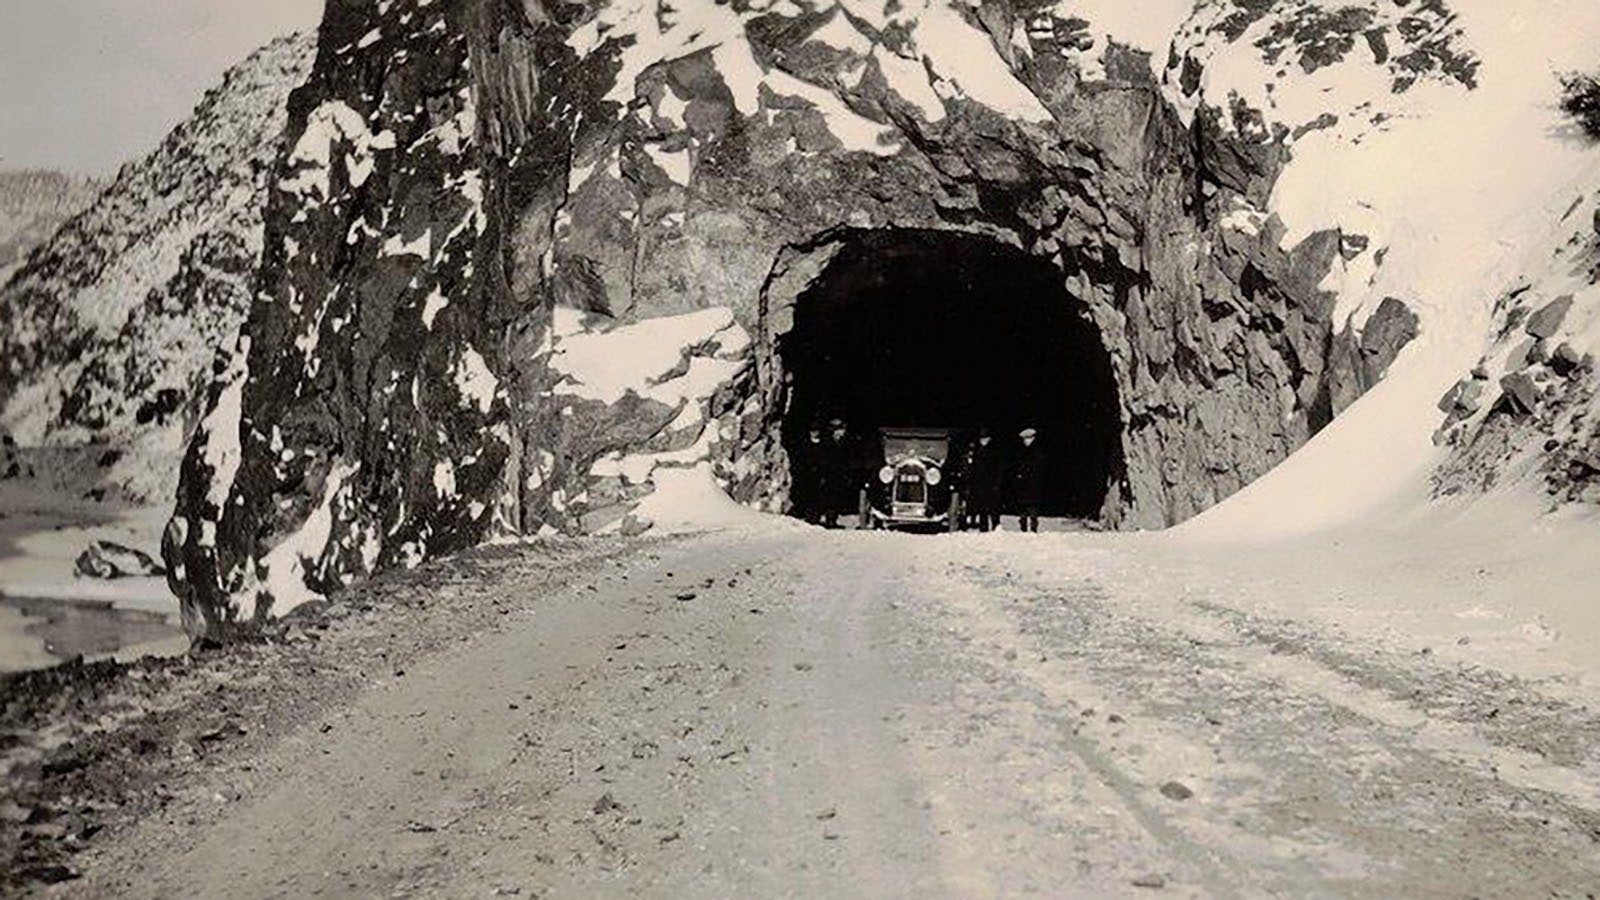 Coming through the second tunnel of the Yellowstone Highway in Wind River Canyon during the first trip on the road in 1924.